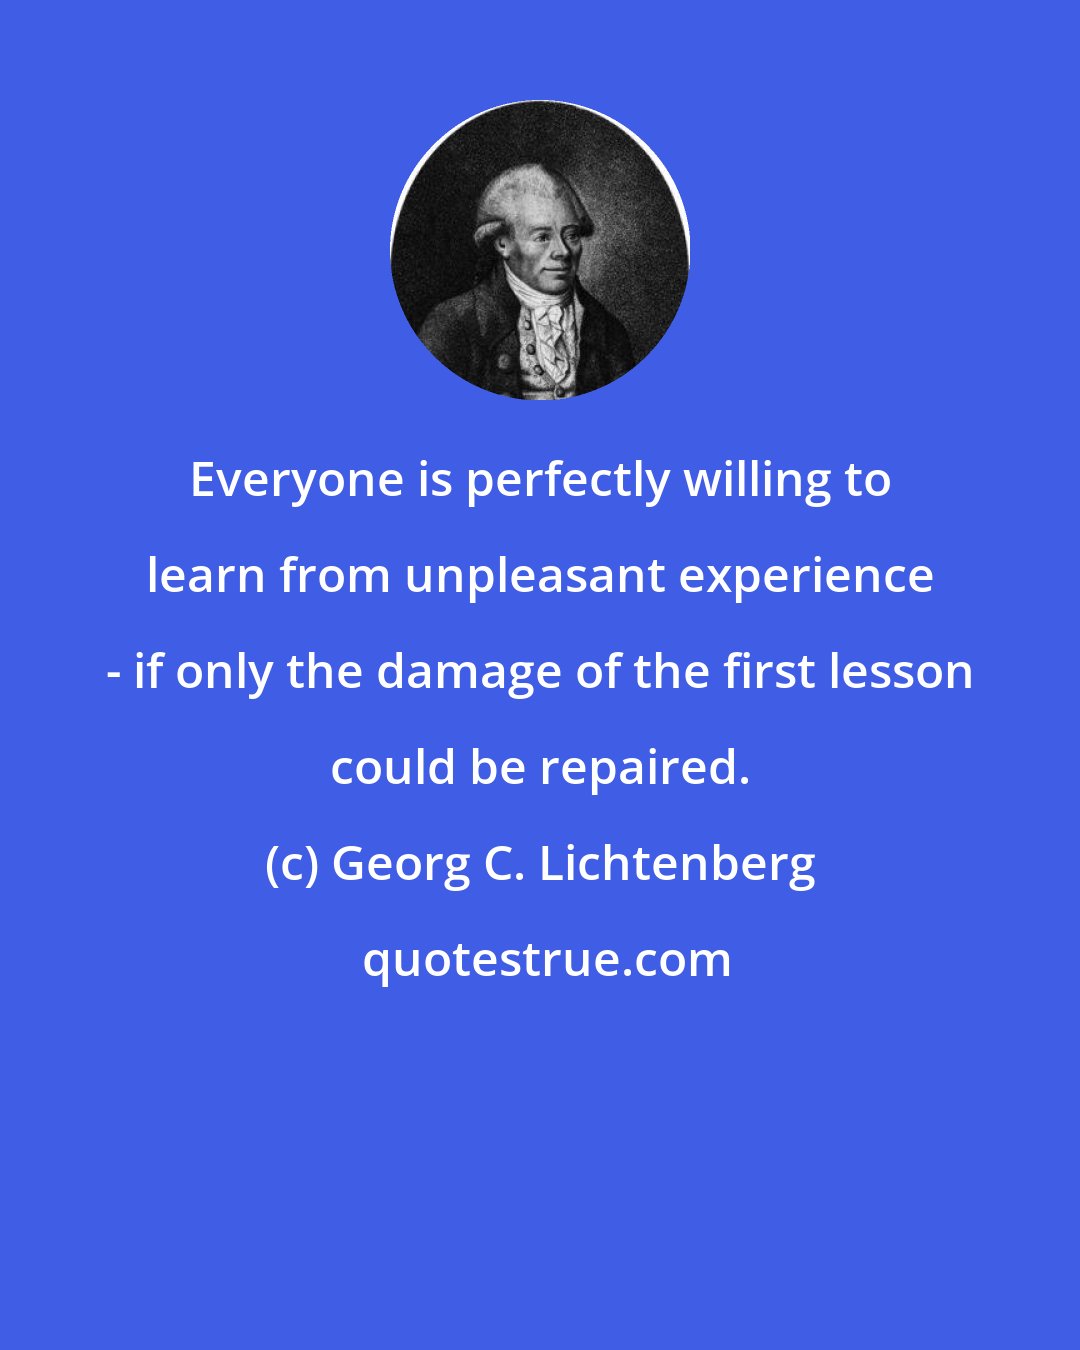 Georg C. Lichtenberg: Everyone is perfectly willing to learn from unpleasant experience - if only the damage of the first lesson could be repaired.